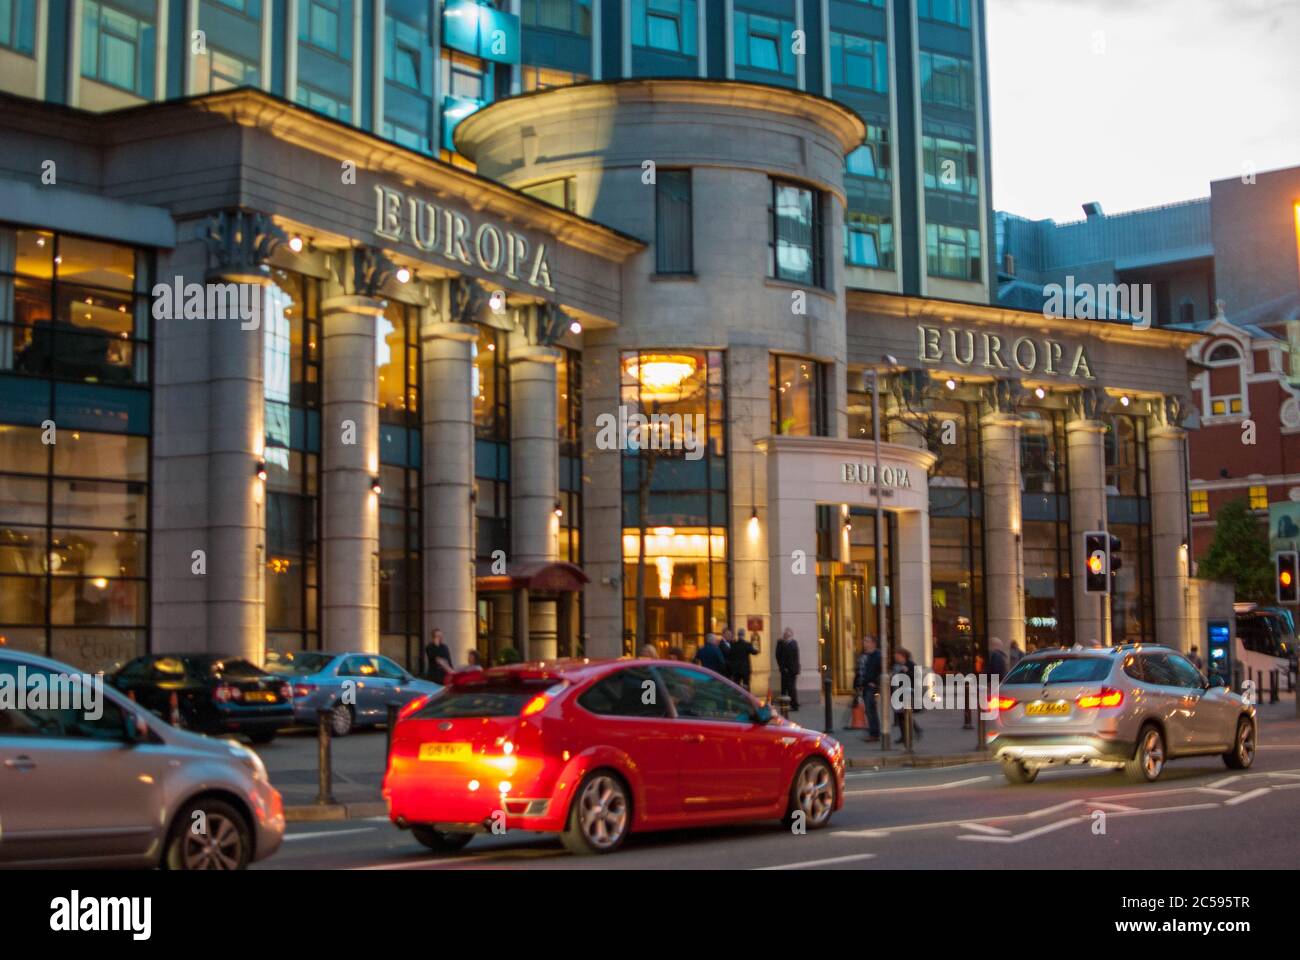 Europa HOtel in BElfast during the night Stock Photo